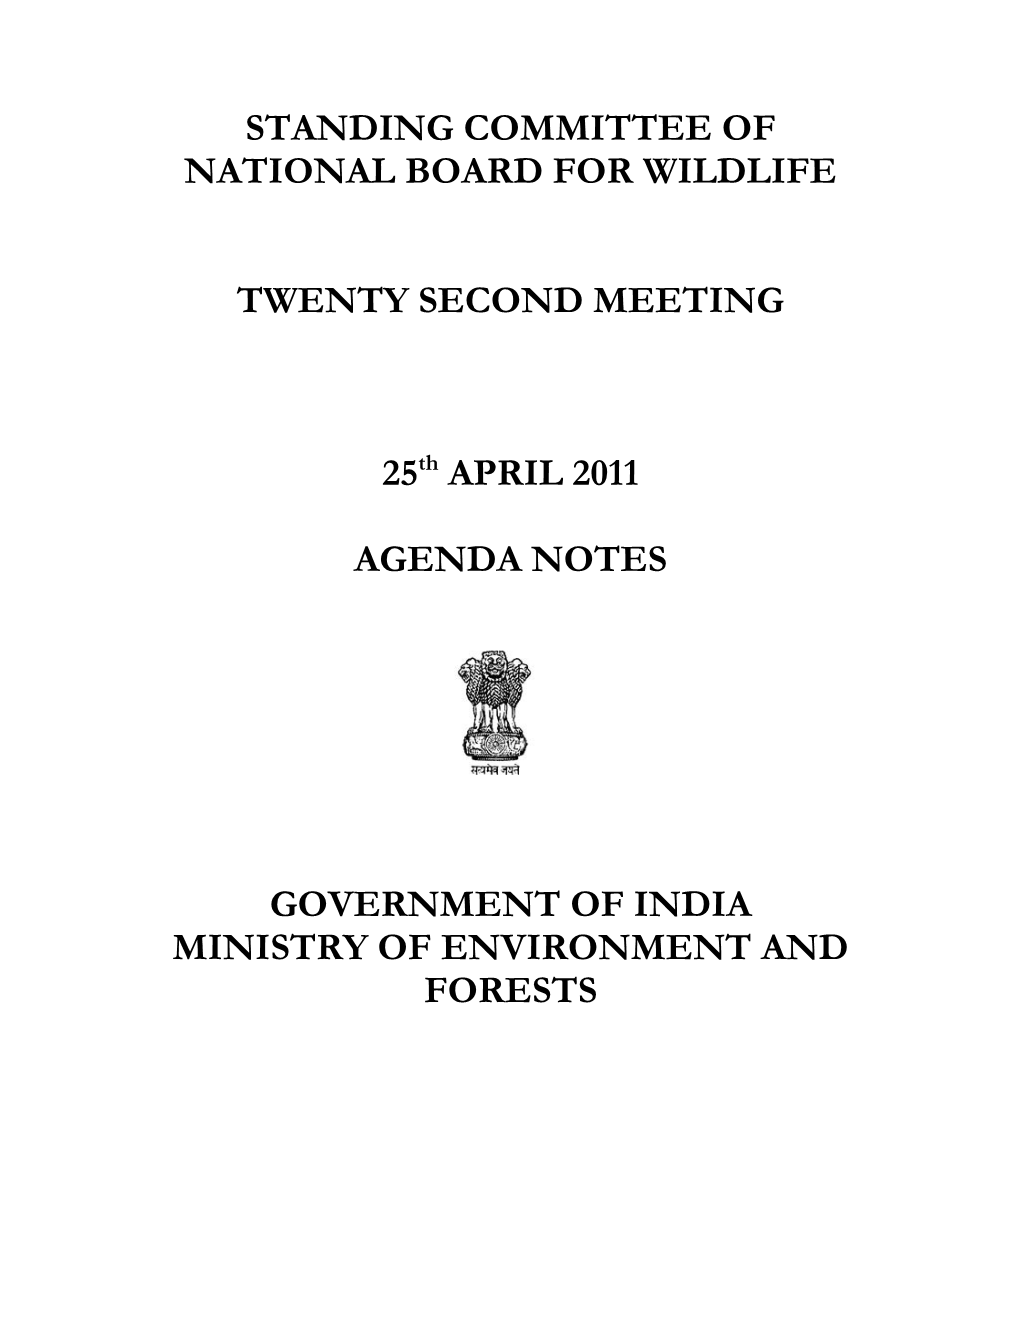 Standing Committee of National Board for Wildlife